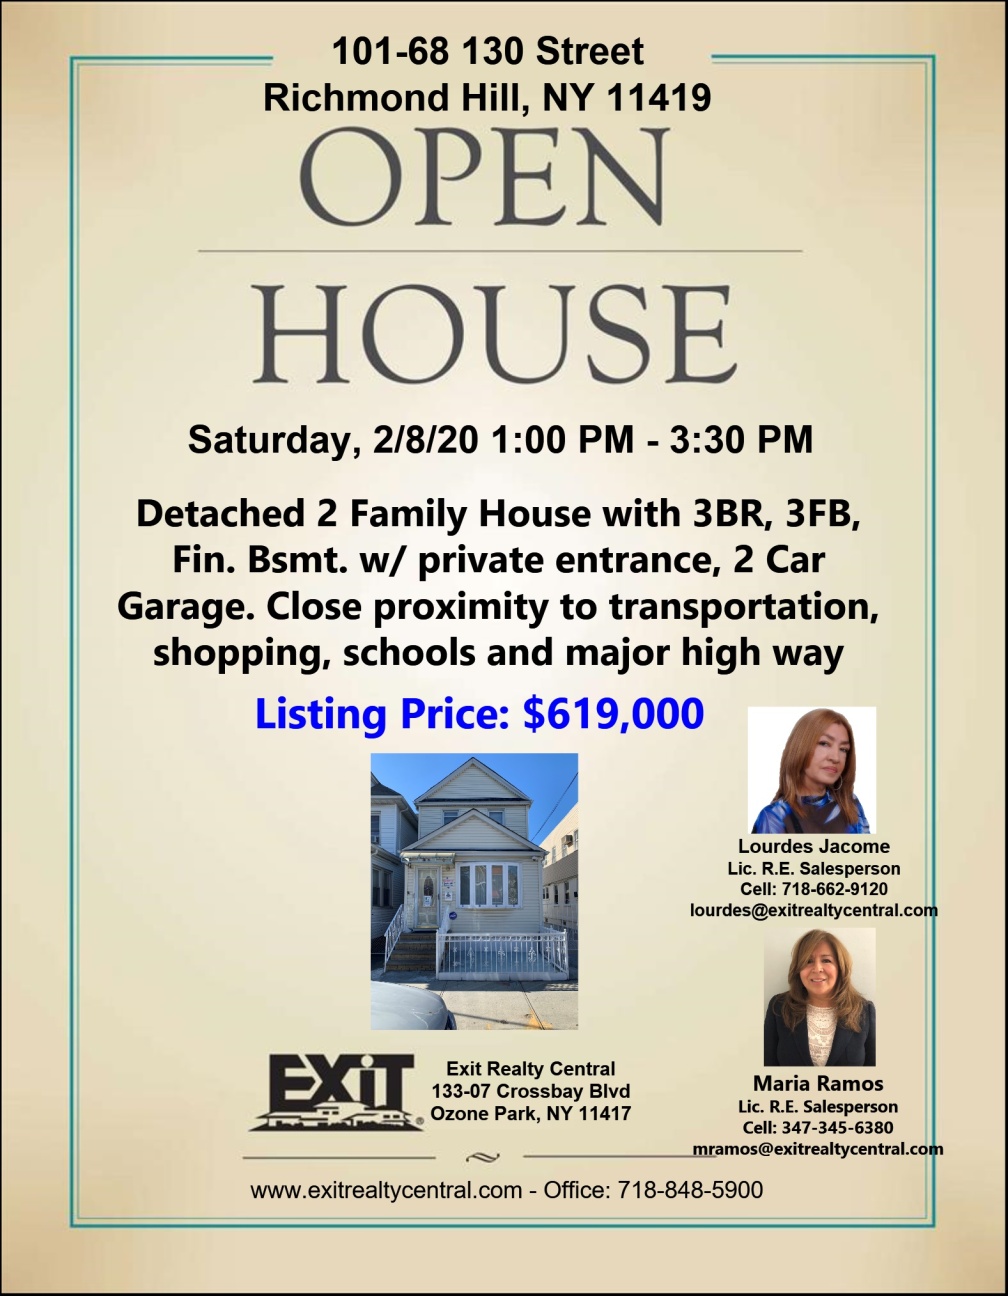 Open House in Richmond Hill 2/8  1-3:30pm